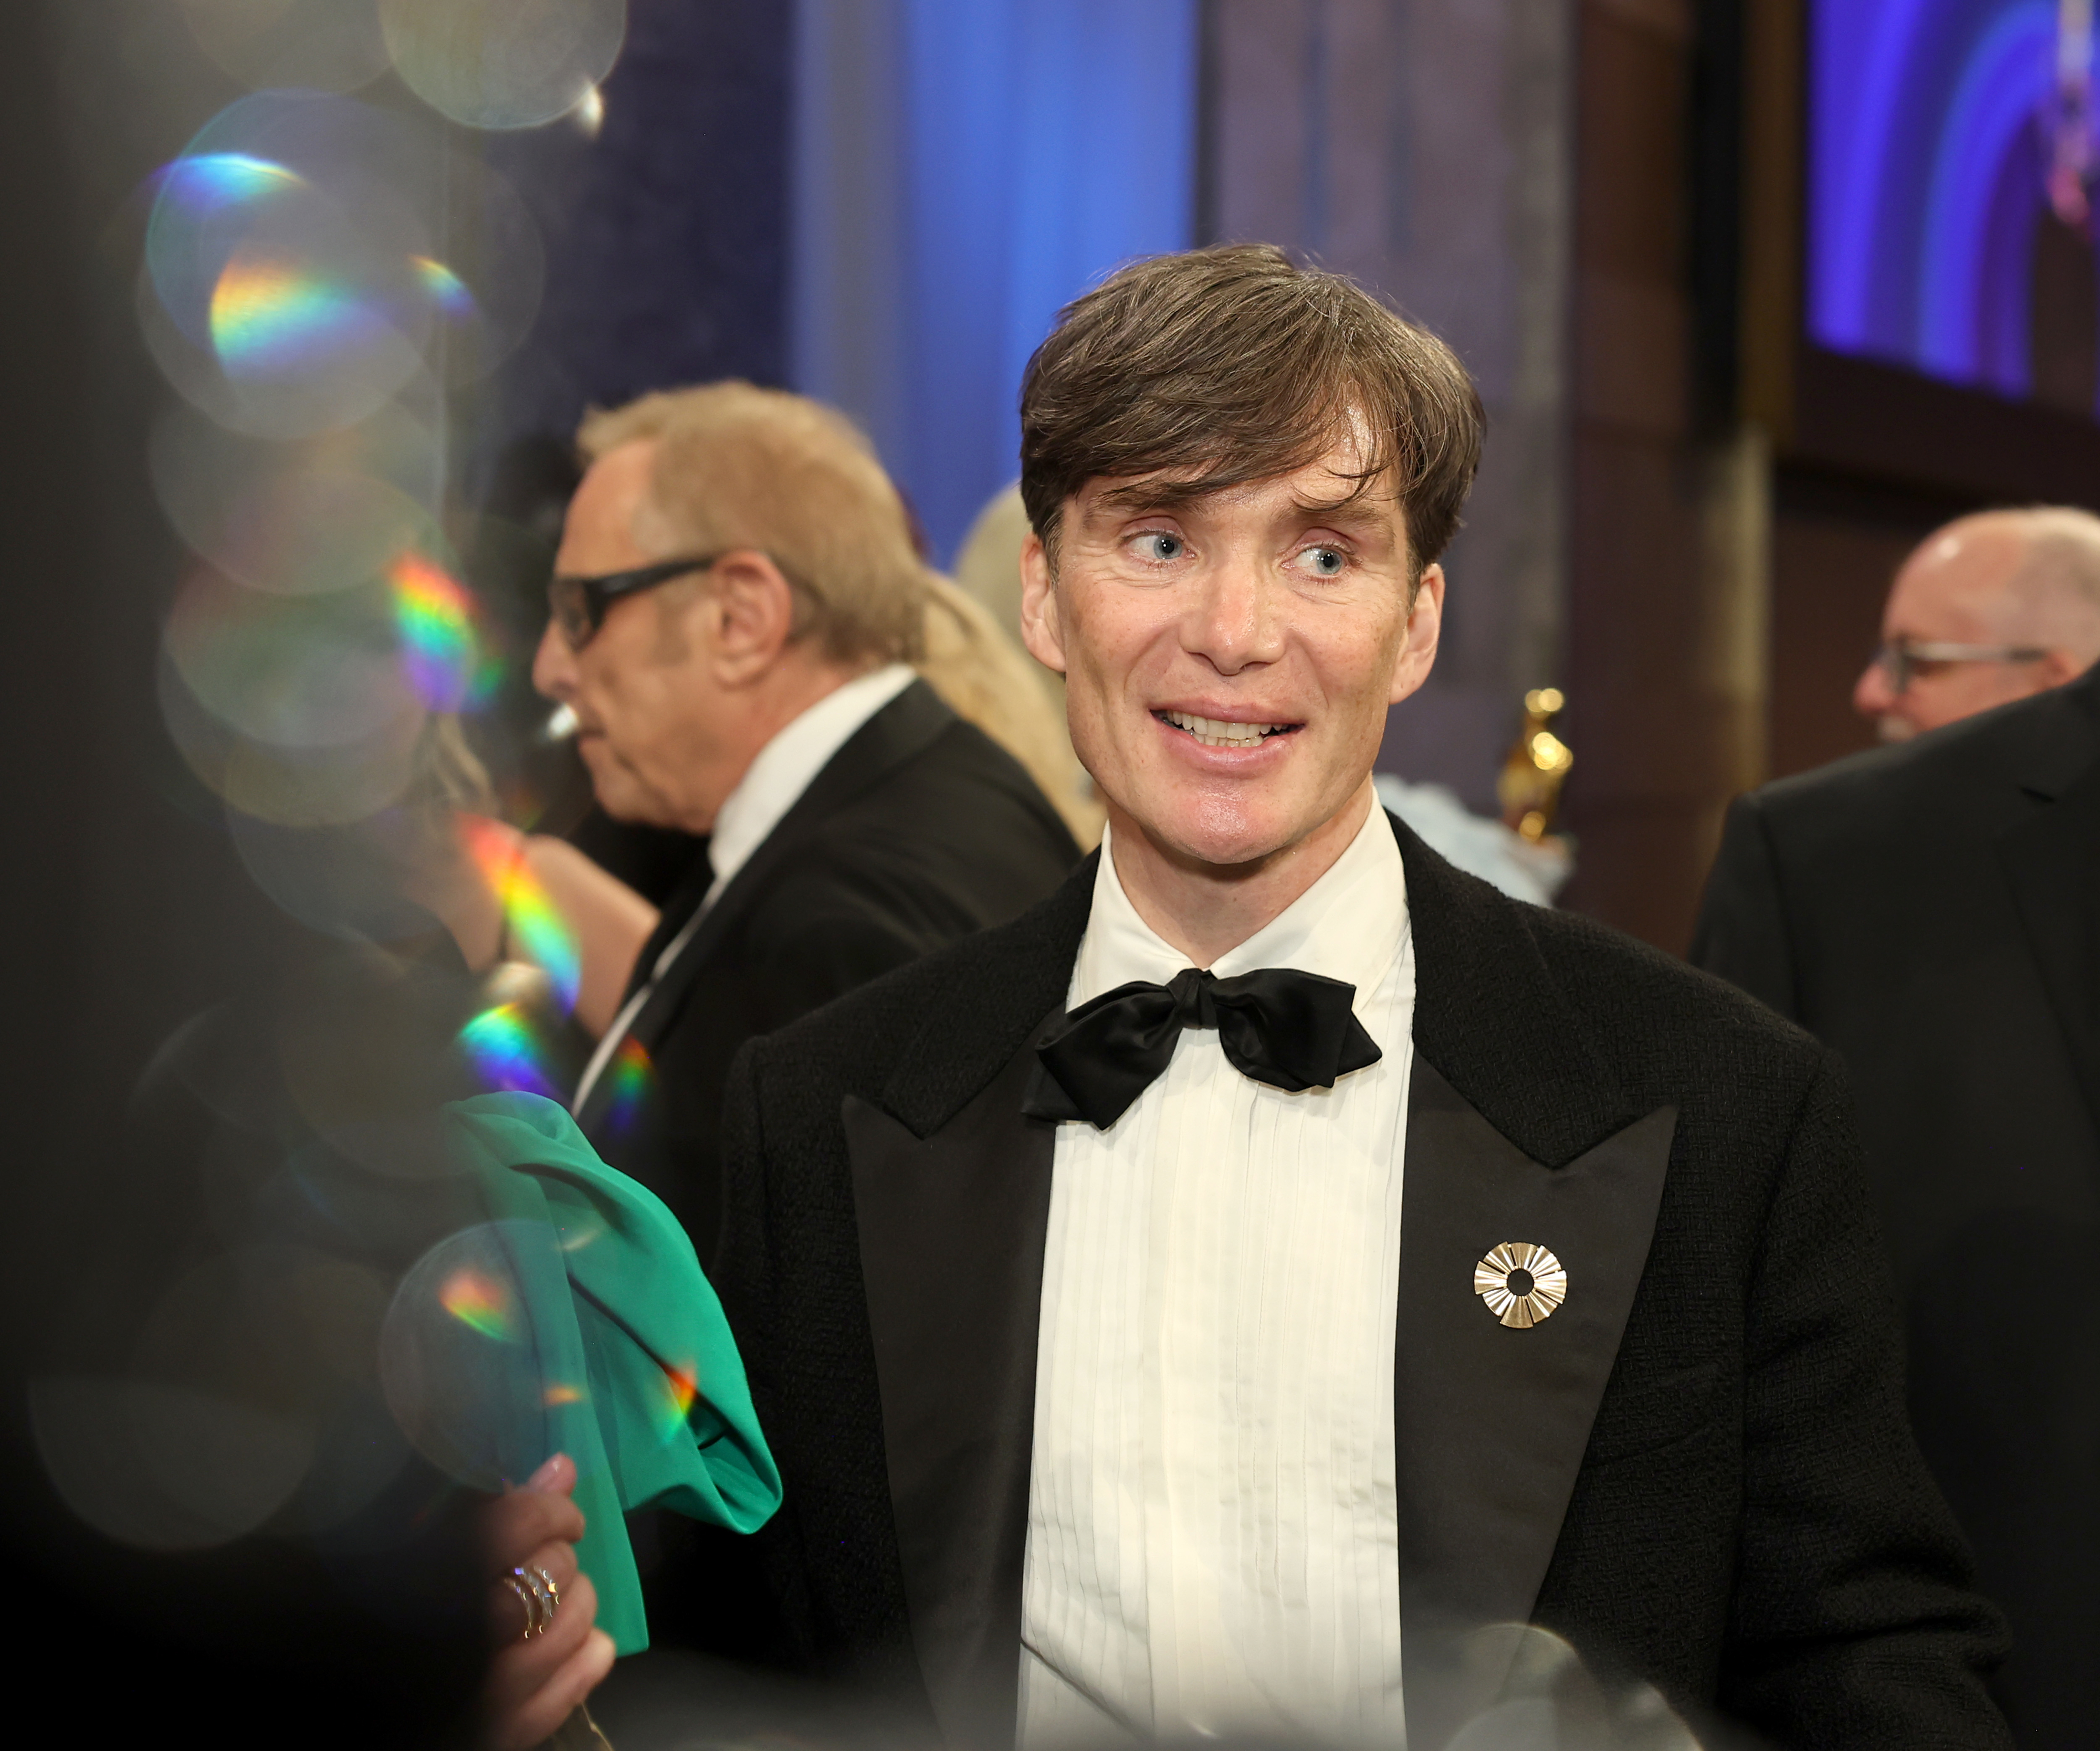 Cillian smiling in a formal suit with a bow tie and a pin on the lapel at an event